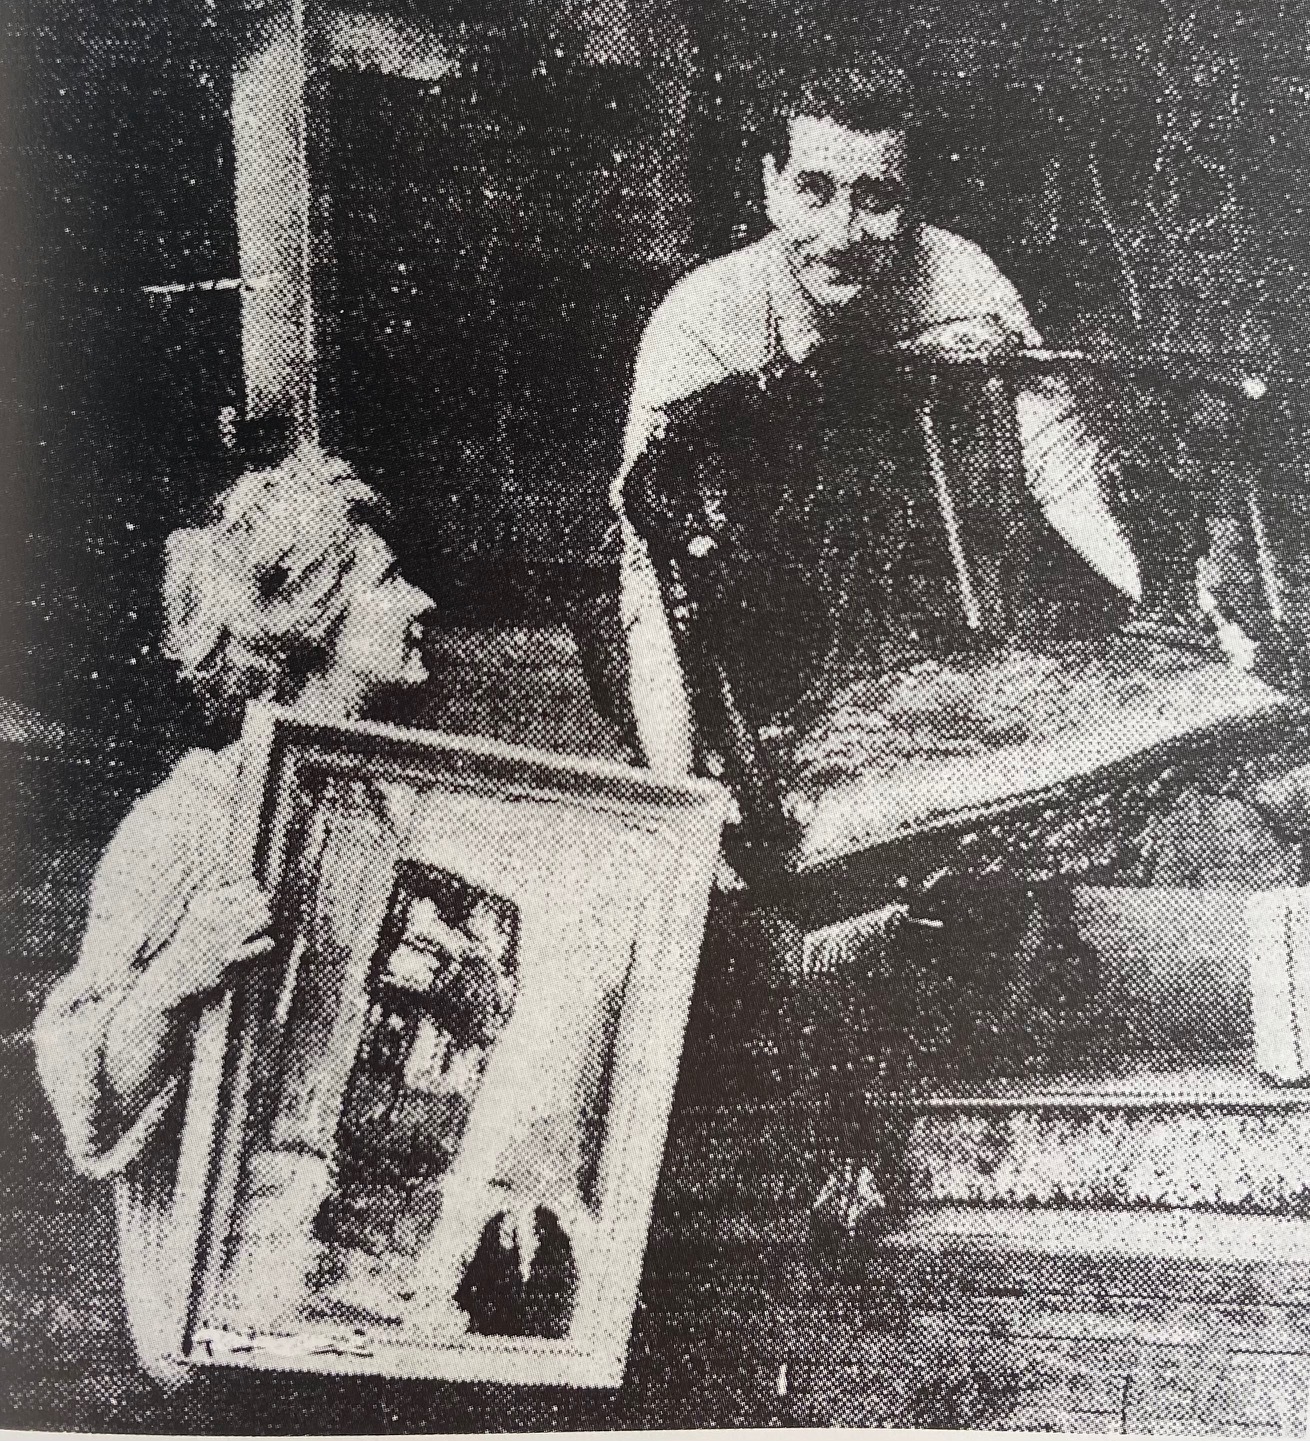 Johnny and Kitty with the painting.